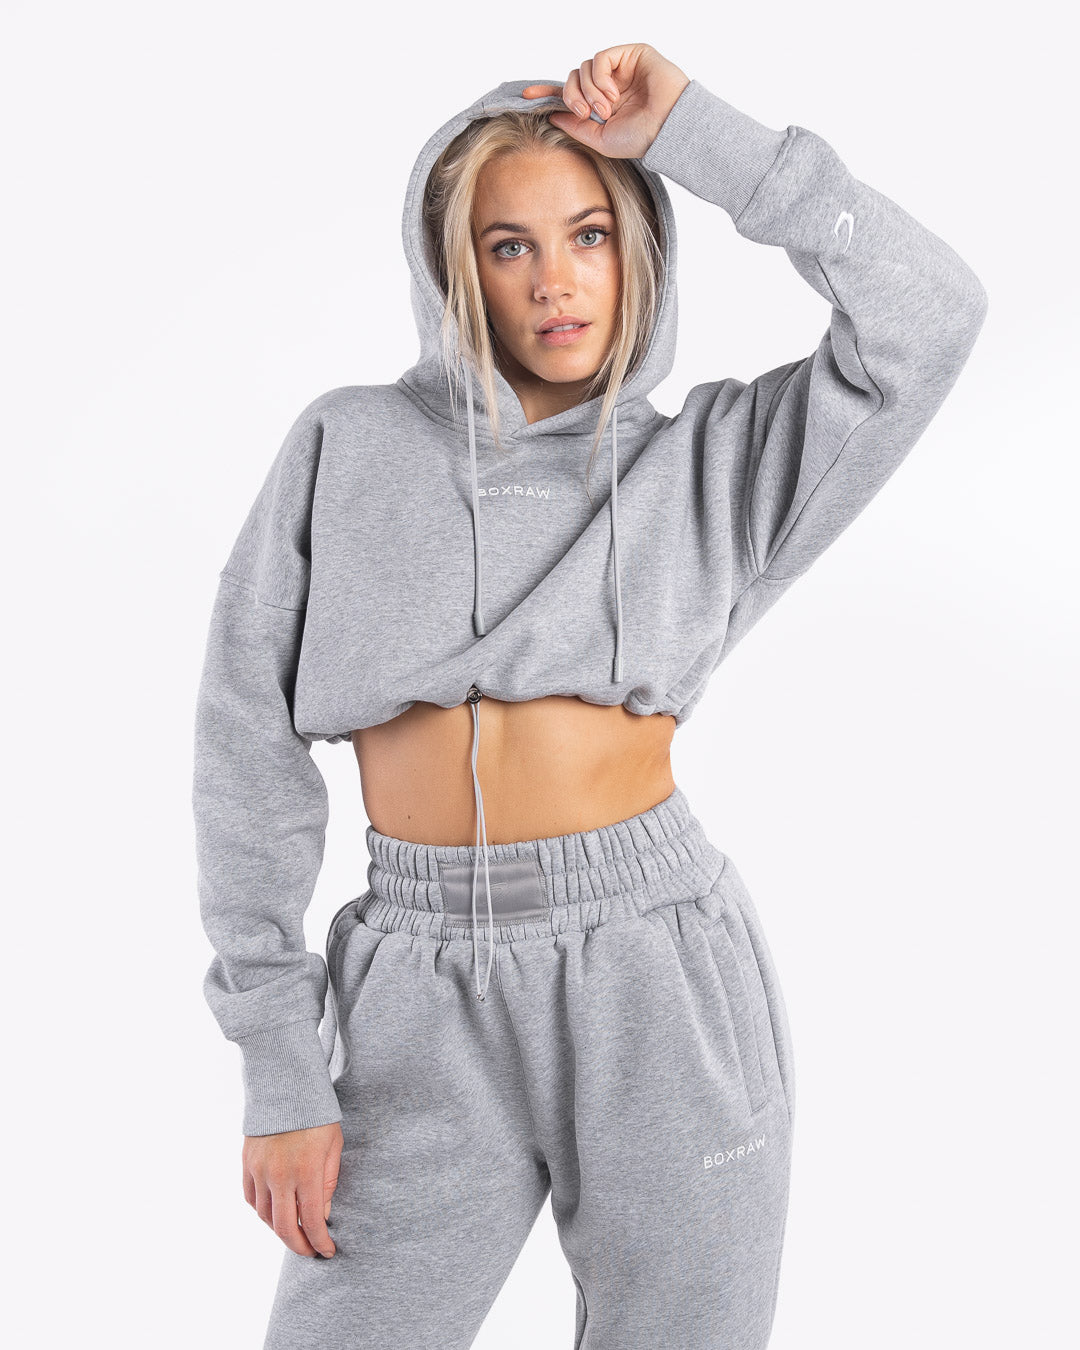 Johnson Cropped Hoodie - Grey | BOXRAW